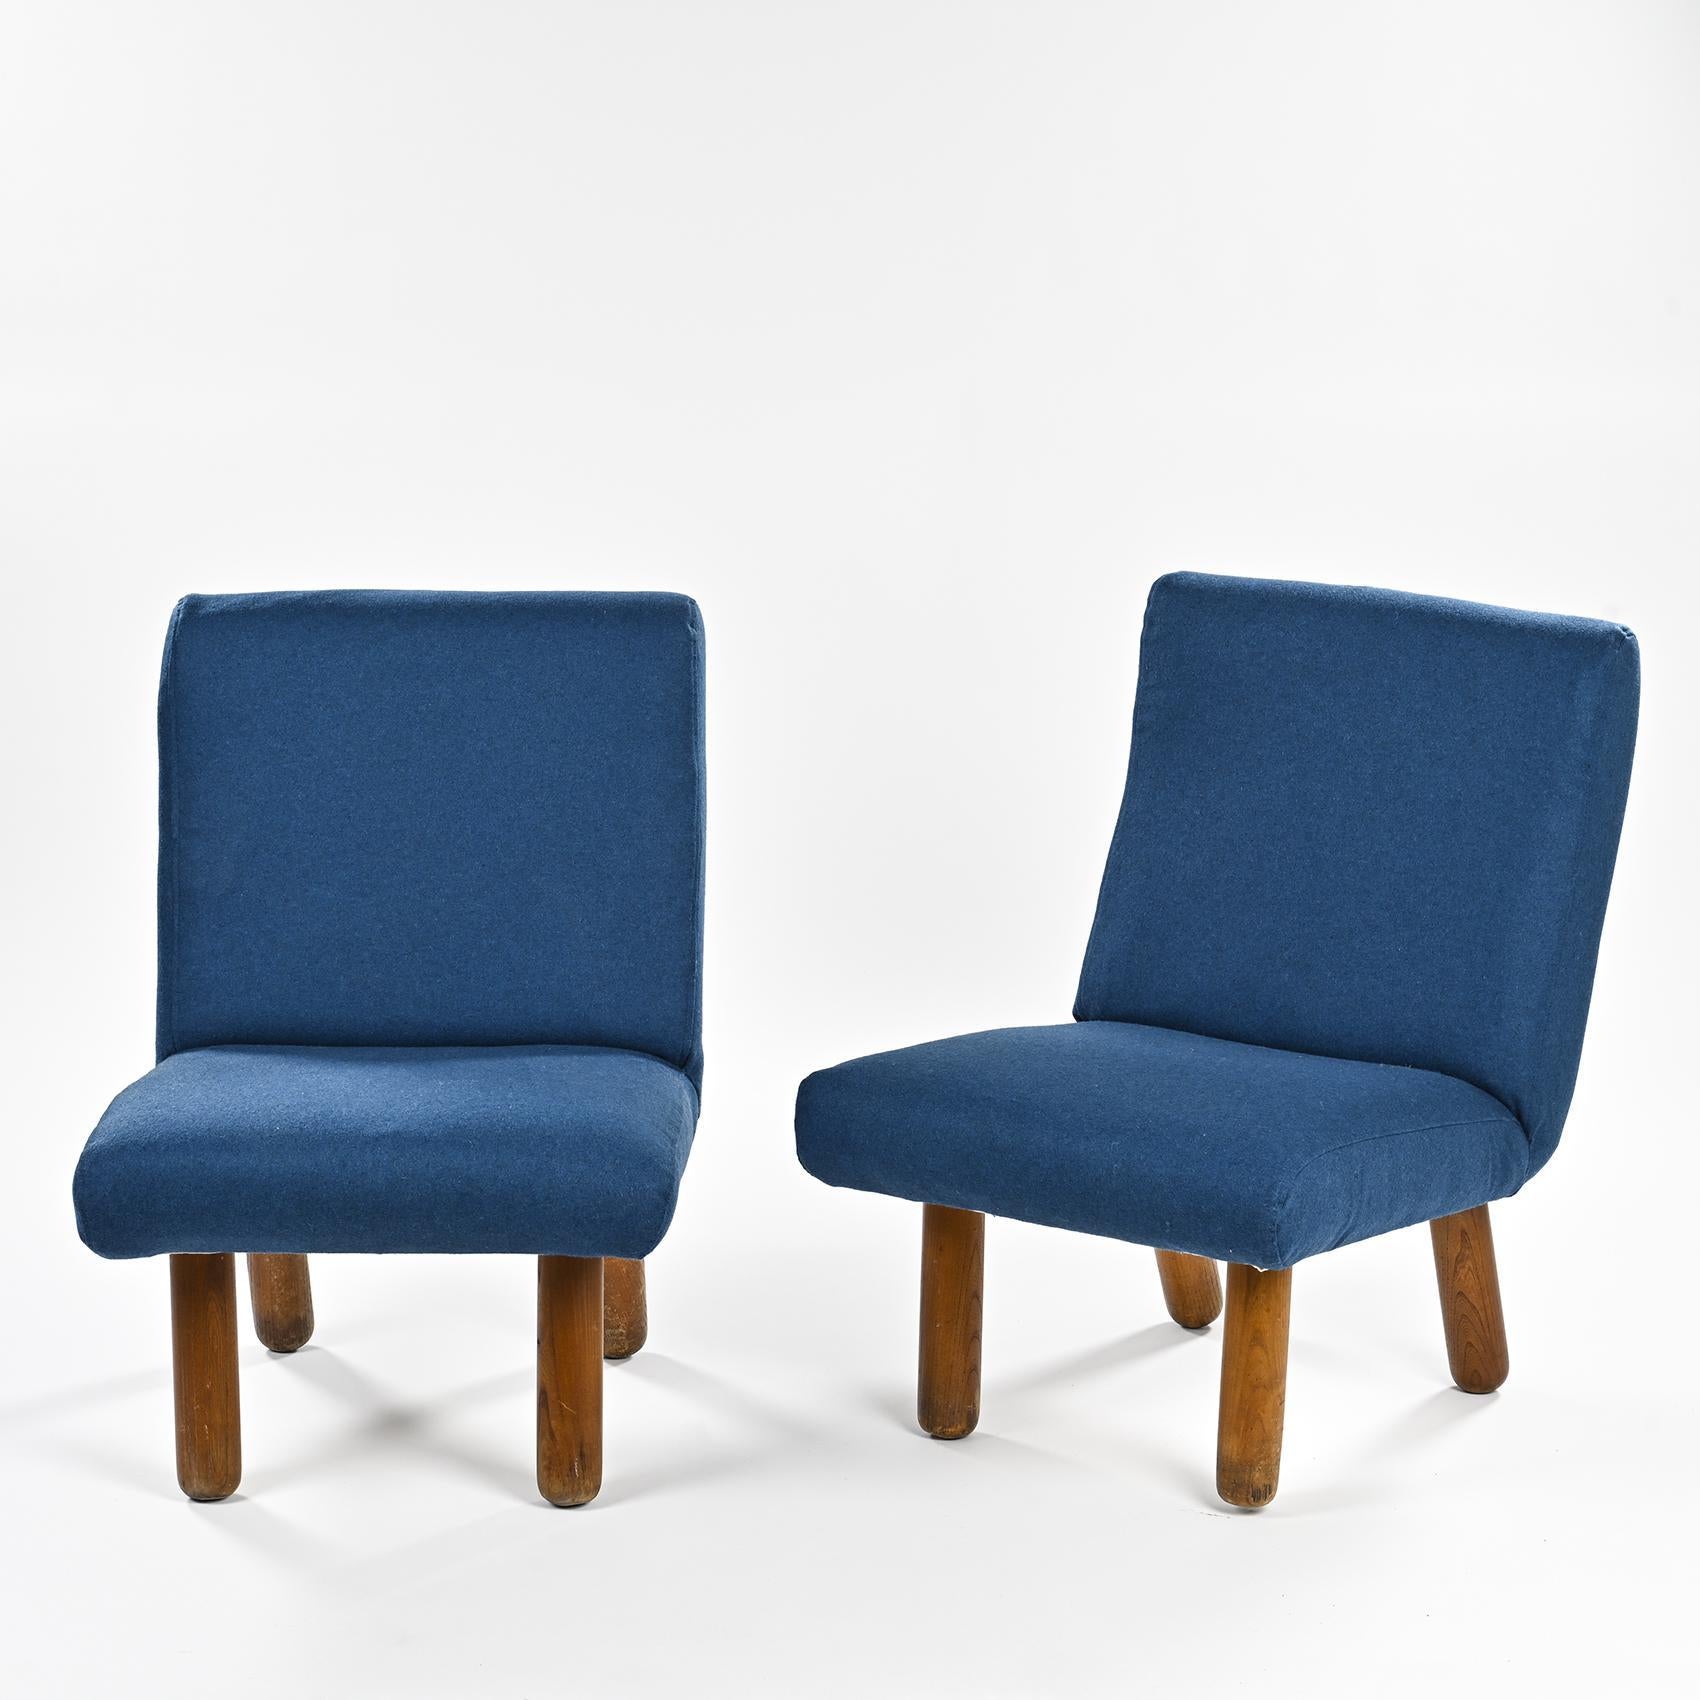 Pair of armchairs dating back to the 1960s, originating from the La Plagne ski resort.

The seat, crafted with foam, is covered in Mont-Blanc wool fabric from Nobilis. It rests on four solid beechwood logs, evoking the aesthetics of Alpine